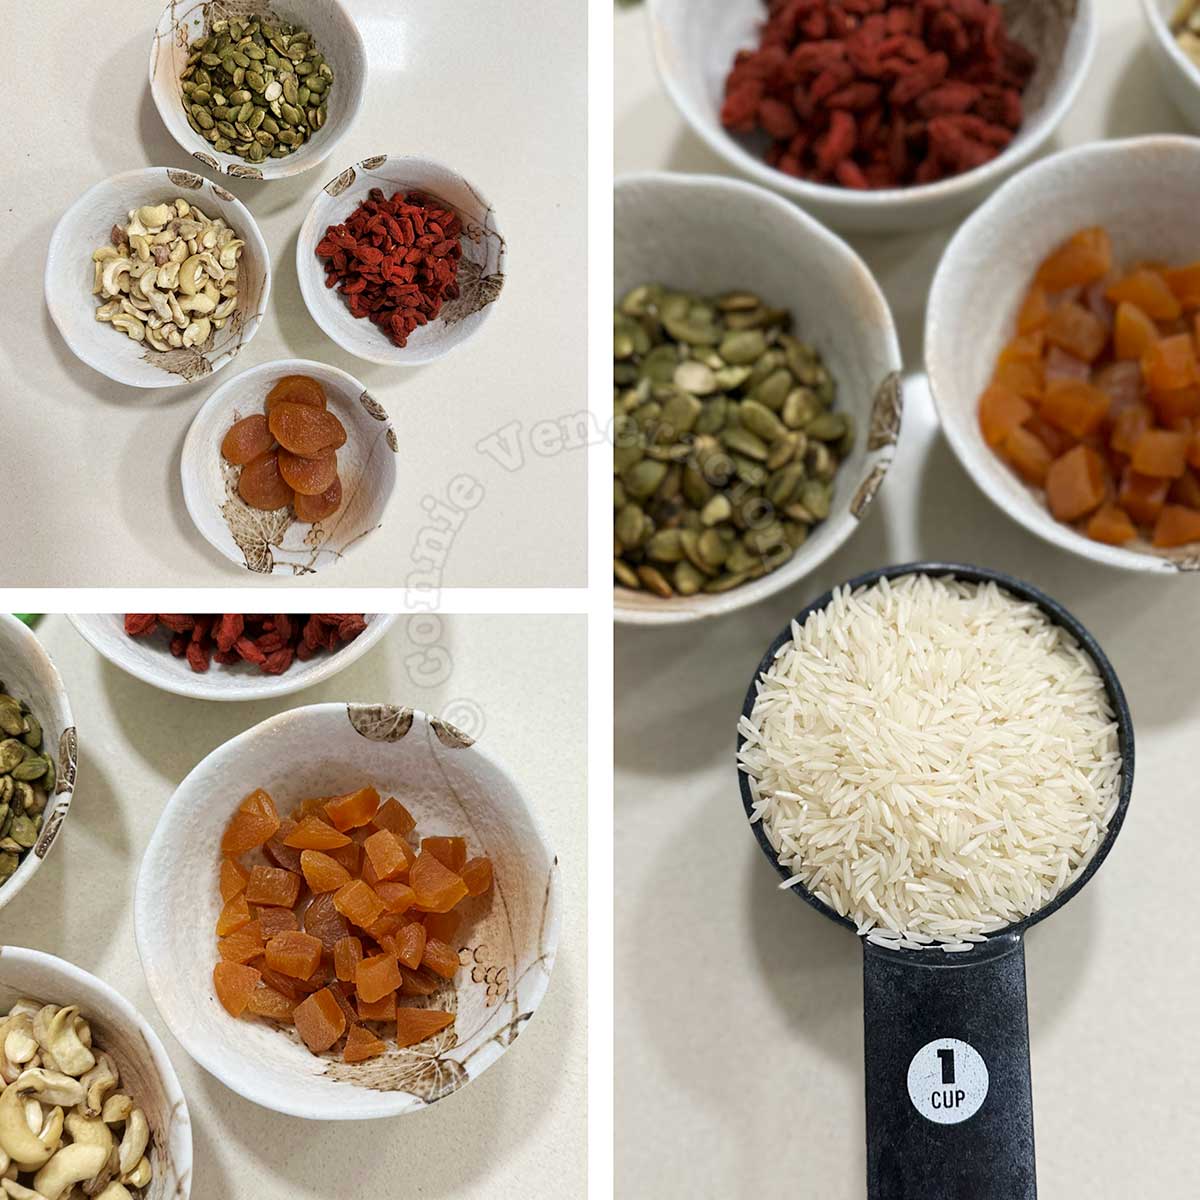 Pumpkin seeds, wolfberry (goji), apricots, cashew nuts and rice